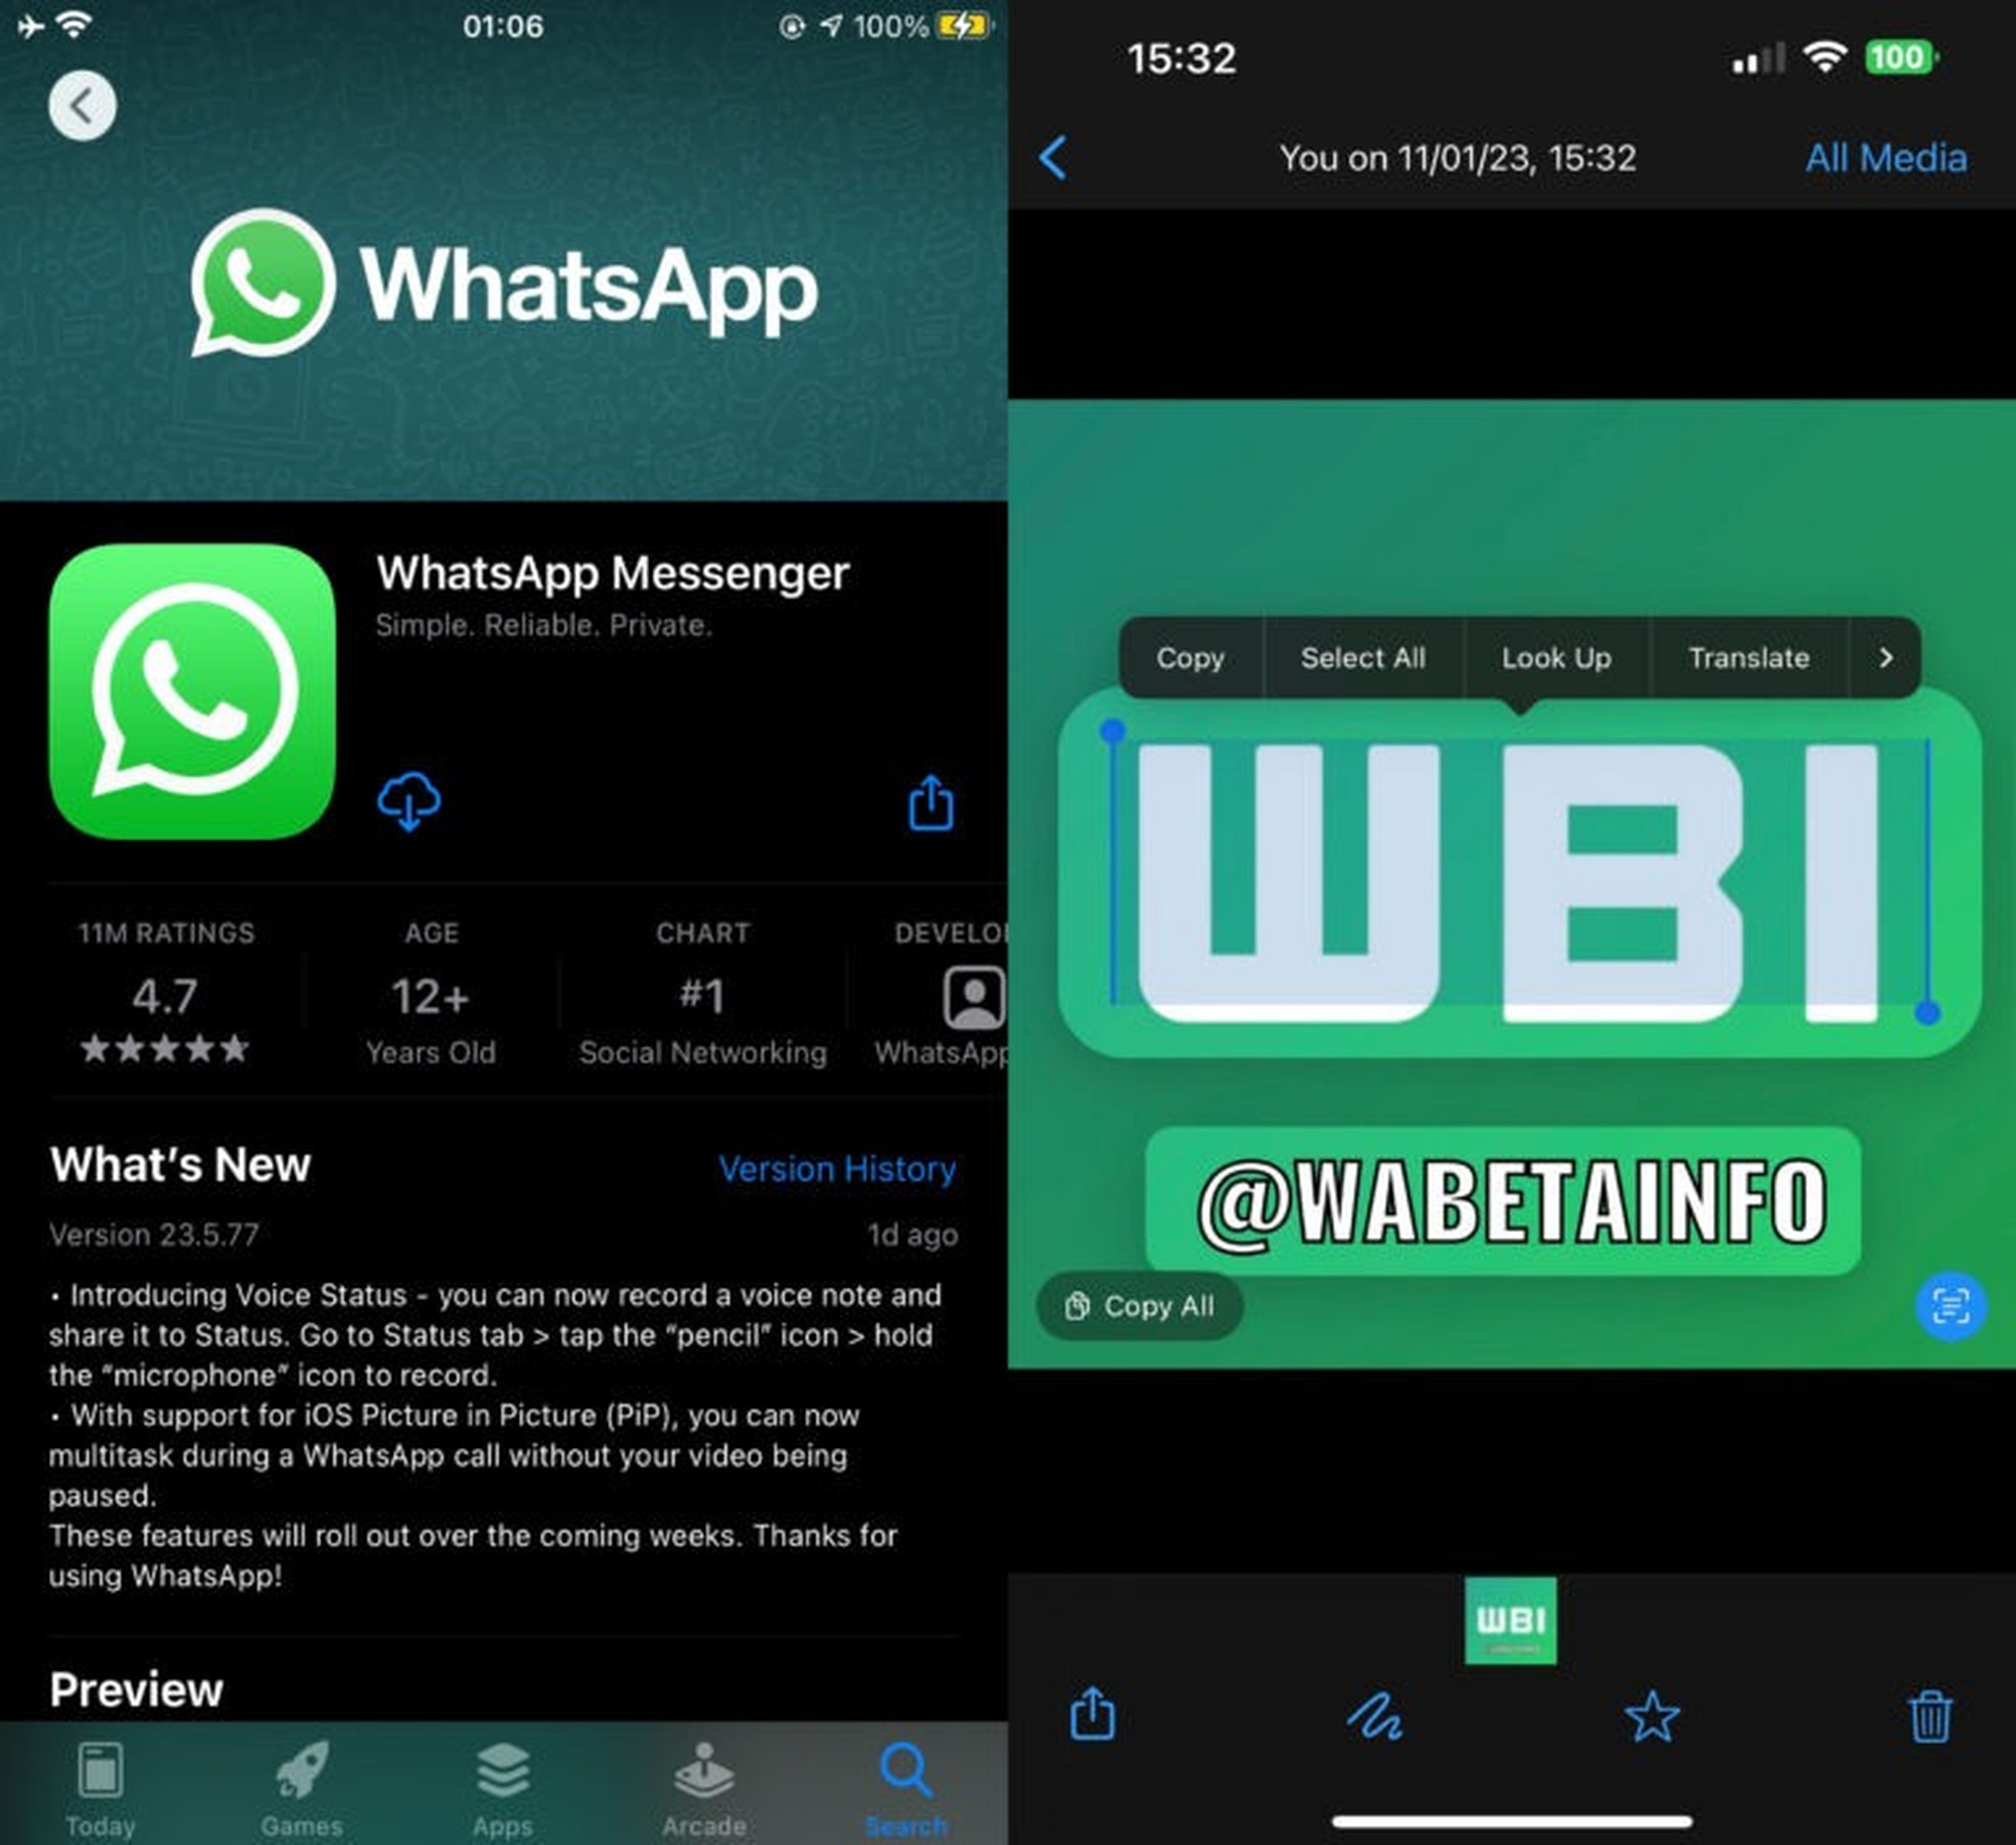 WhatsApp bets on intelligence: soon you will be able to copy text from photos